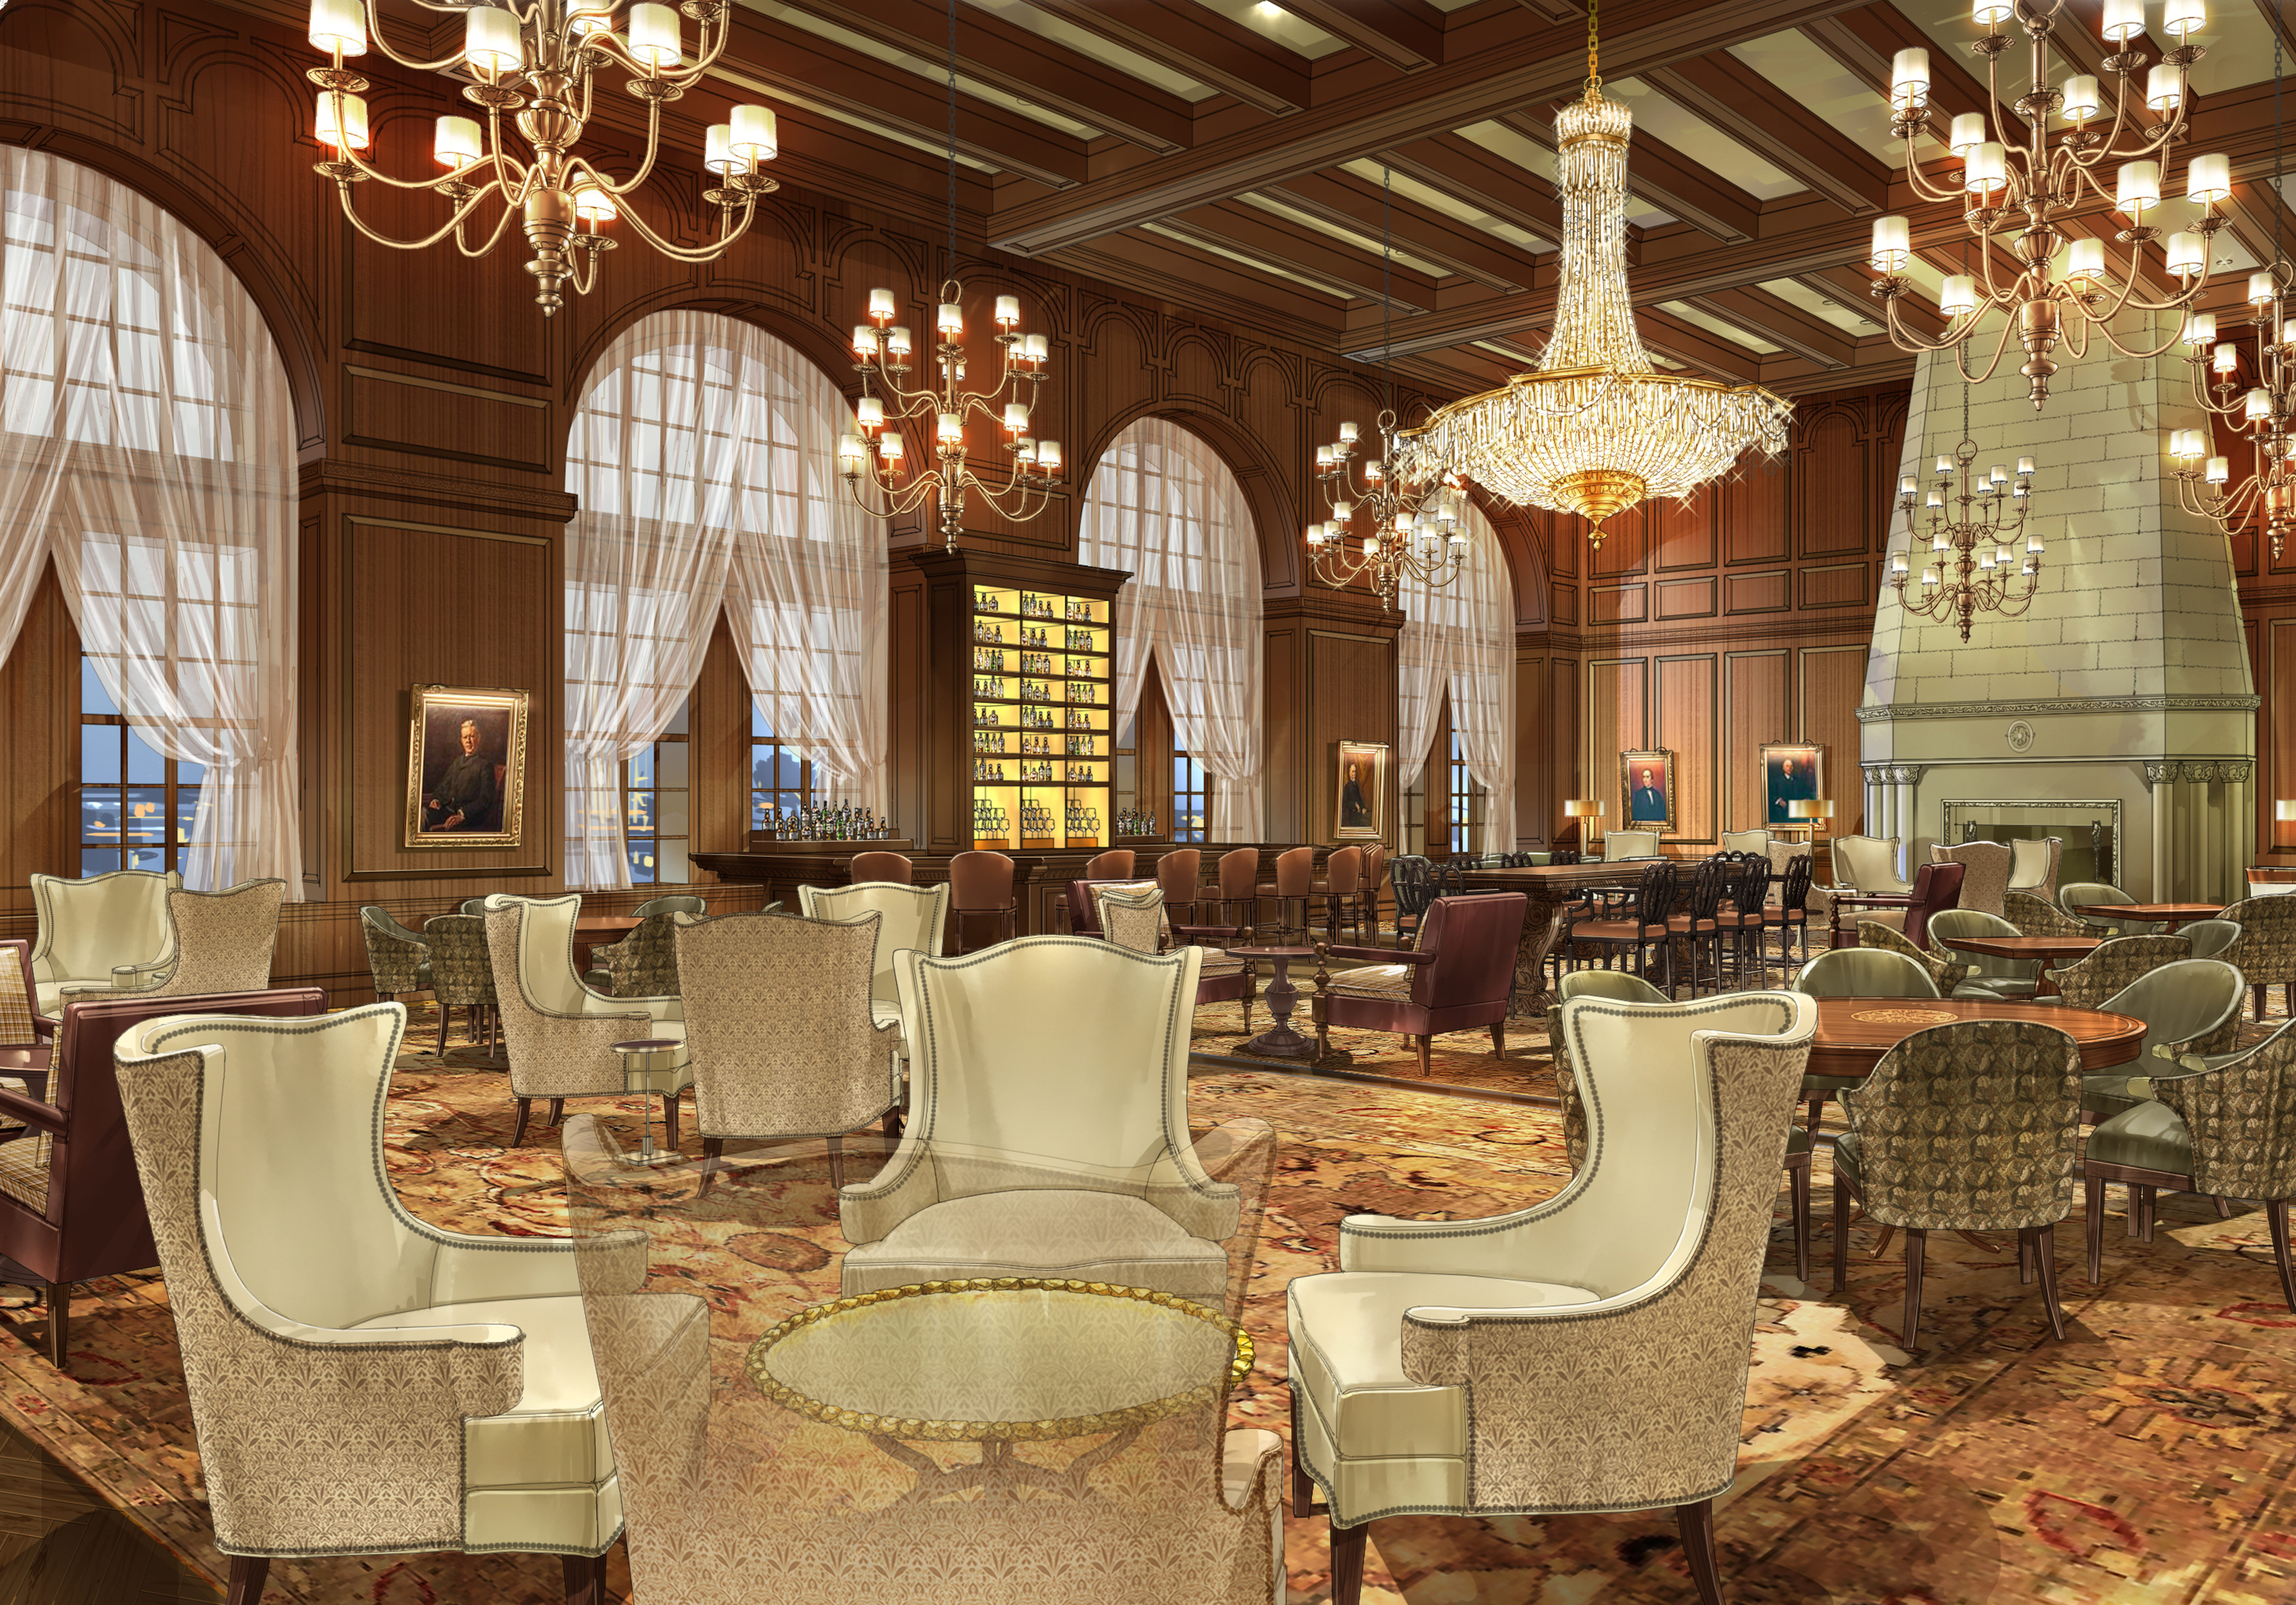 A grand dining room with sophisticated furnishings, large windows, elegant chandeliers, and a fireplace.